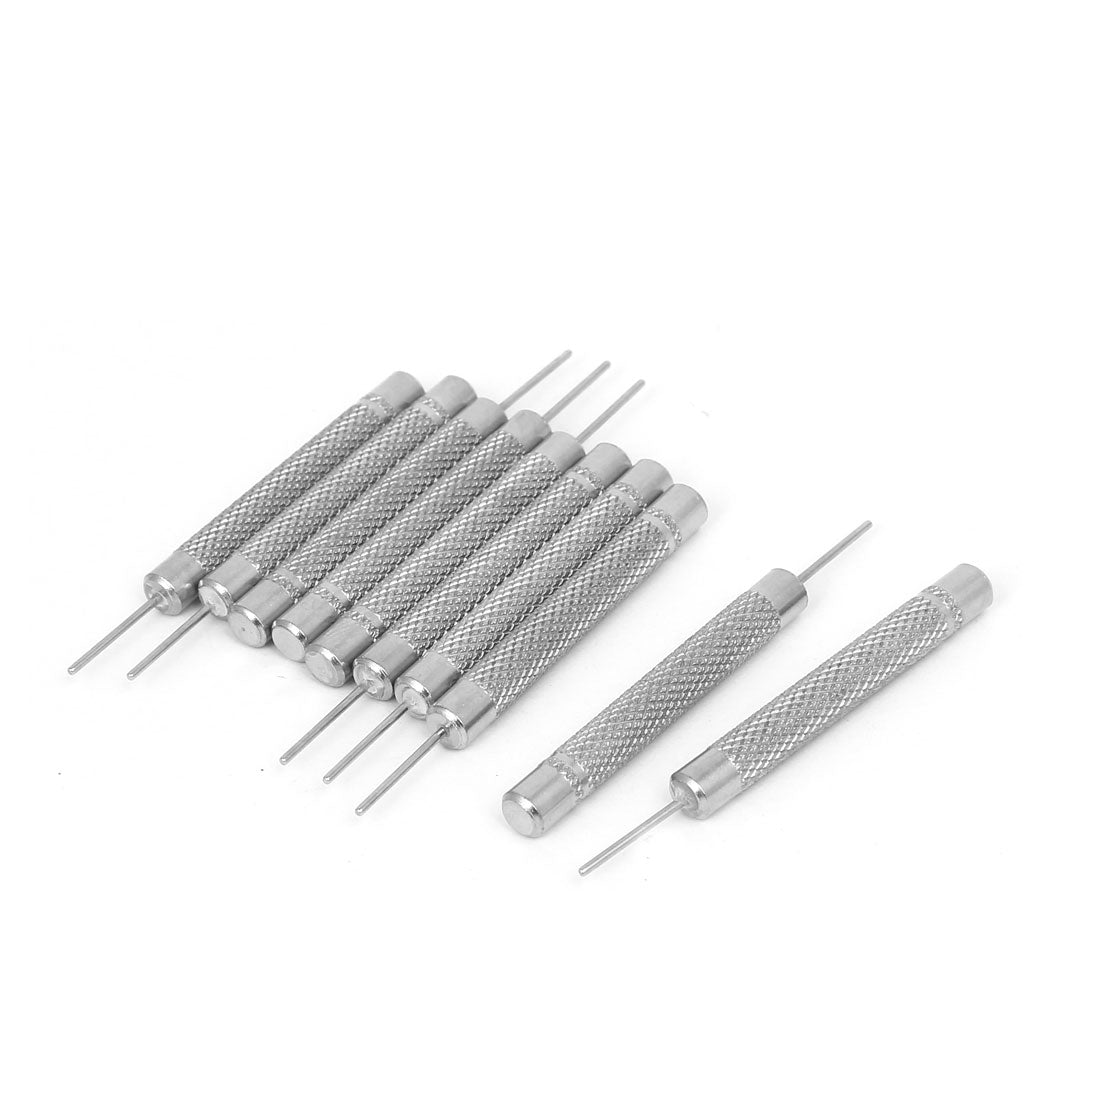 uxcell Uxcell 0.9mm Dia Tip Watch Band Strap Link Pin Remover Punch Repair Tool 10pcs